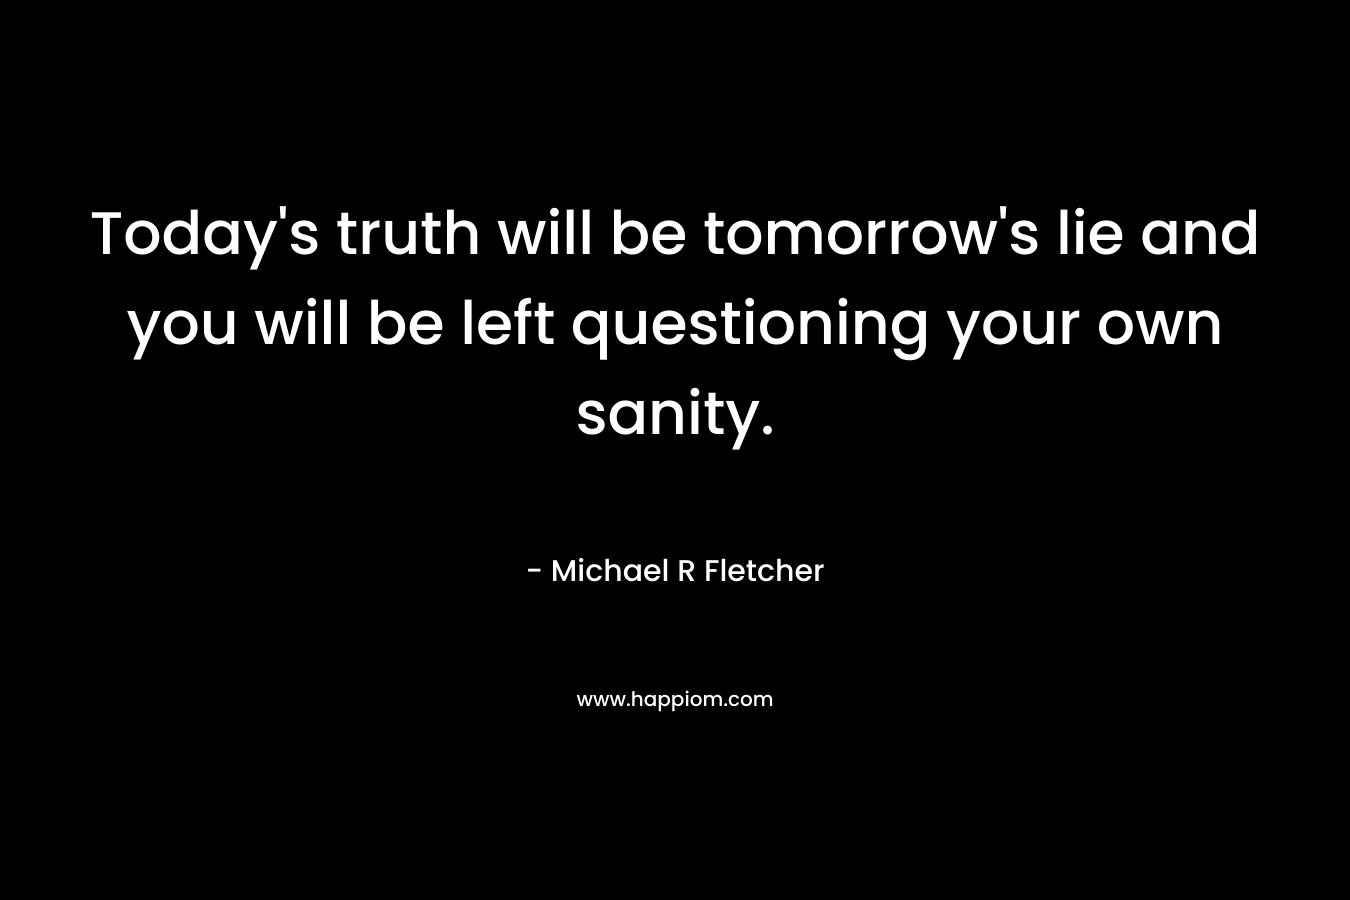 Today’s truth will be tomorrow’s lie and you will be left questioning your own sanity. – Michael R Fletcher